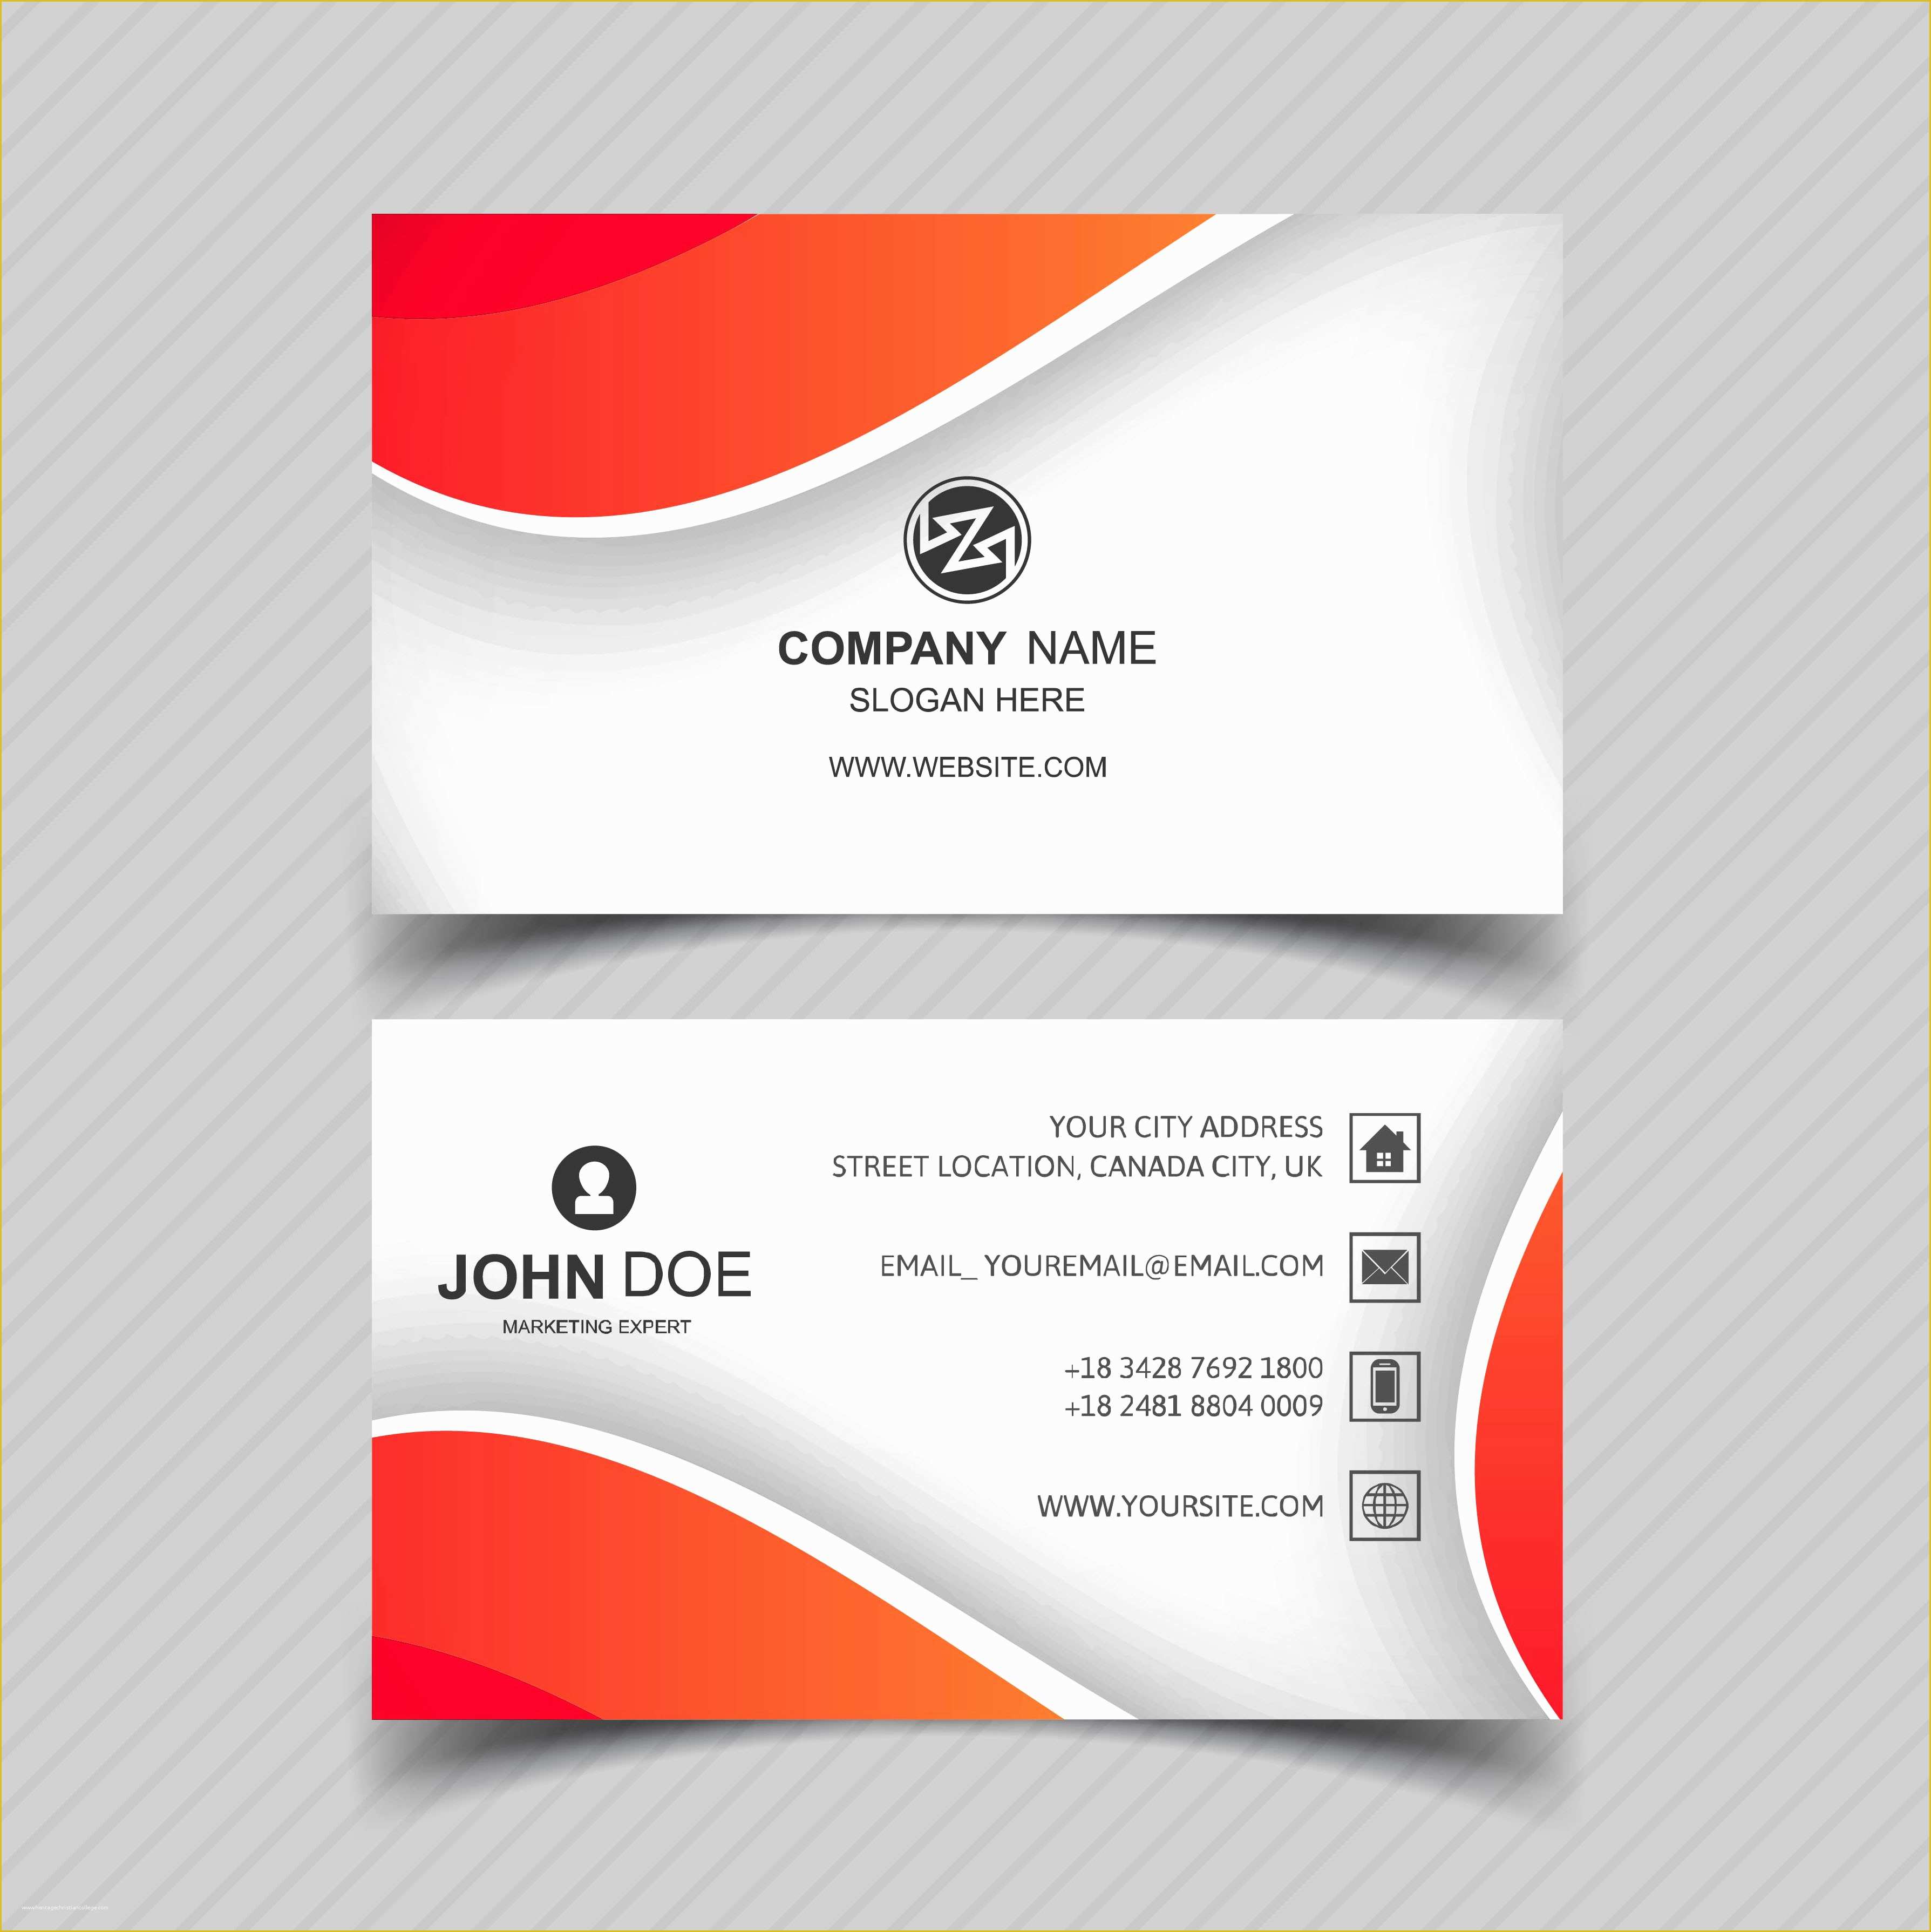 Modern Business Cards Templates Free Download Of Modern Business Card Template with Wave Design Download